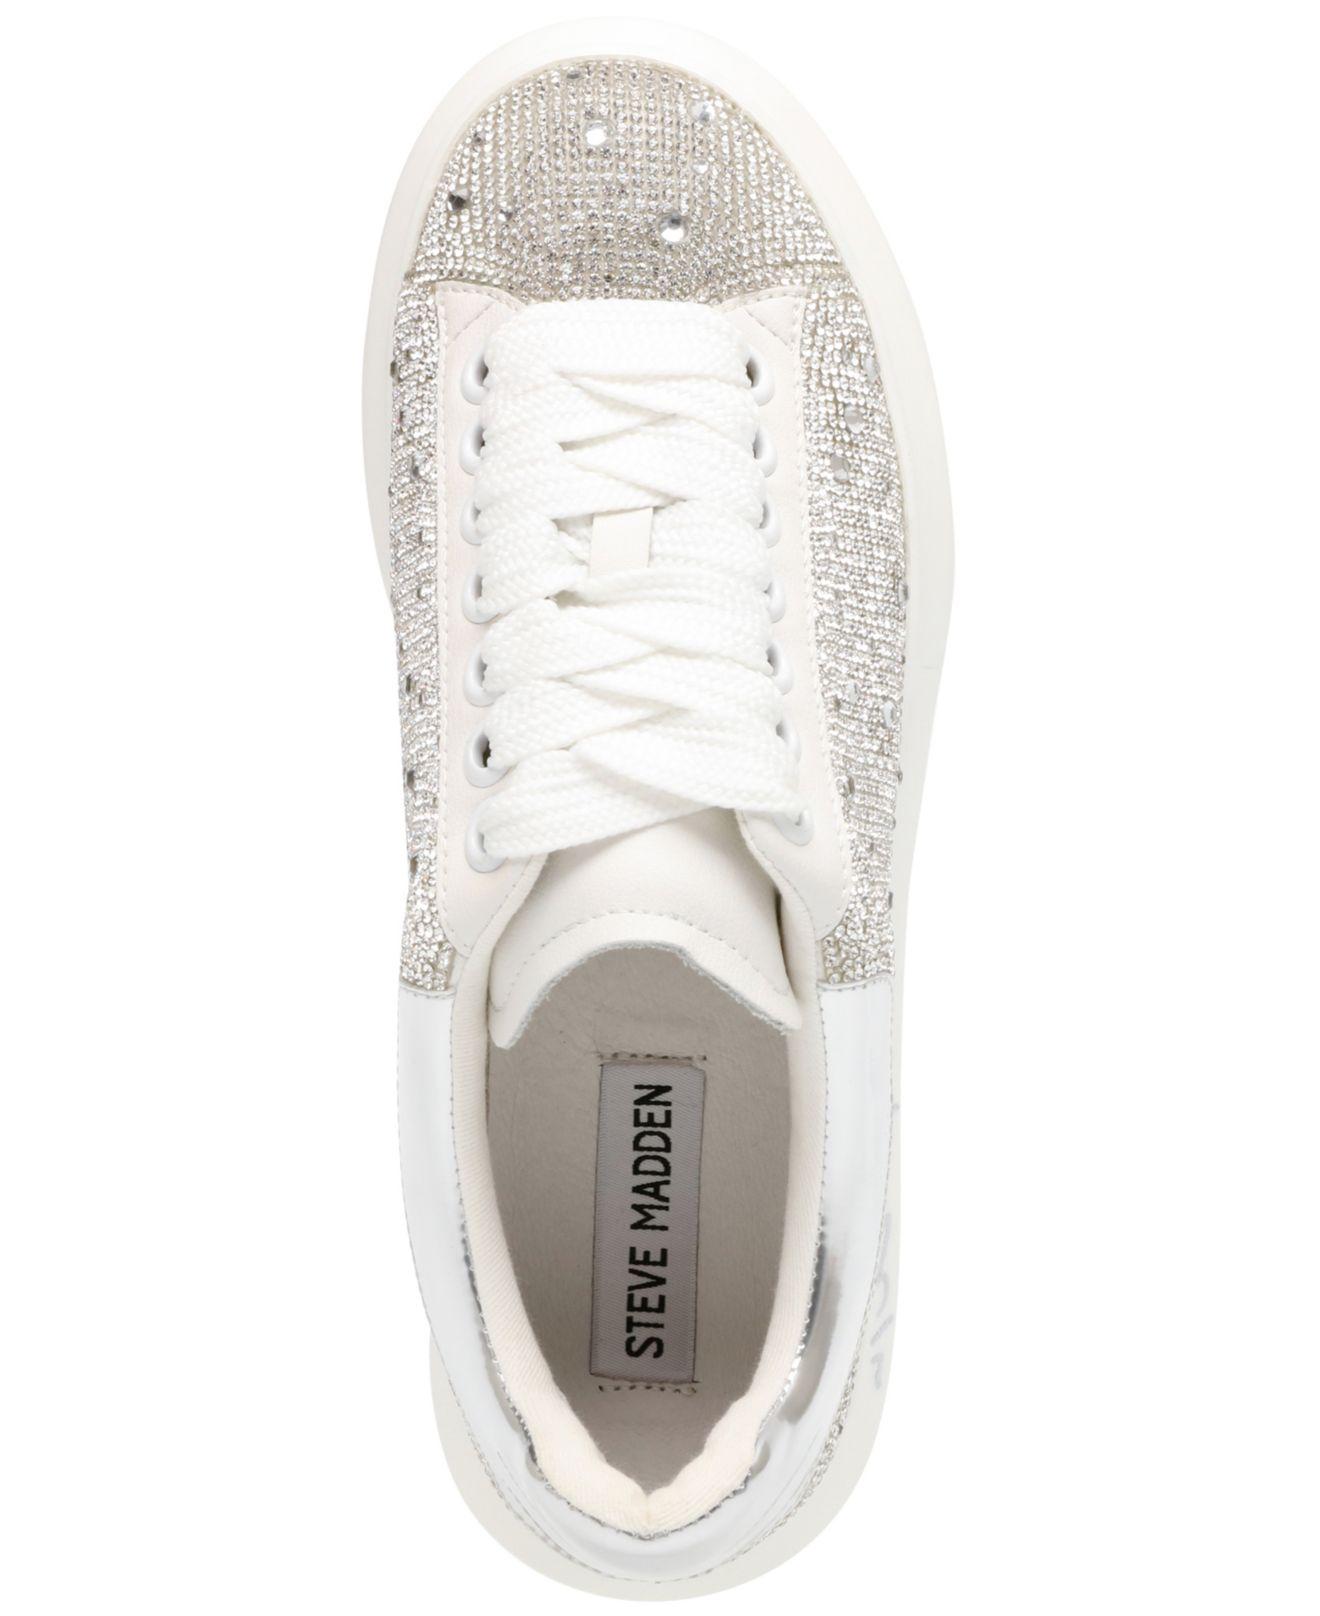 Steve Madden Glimmer-r Flatform Lace-up Sneakers in White | Lyst